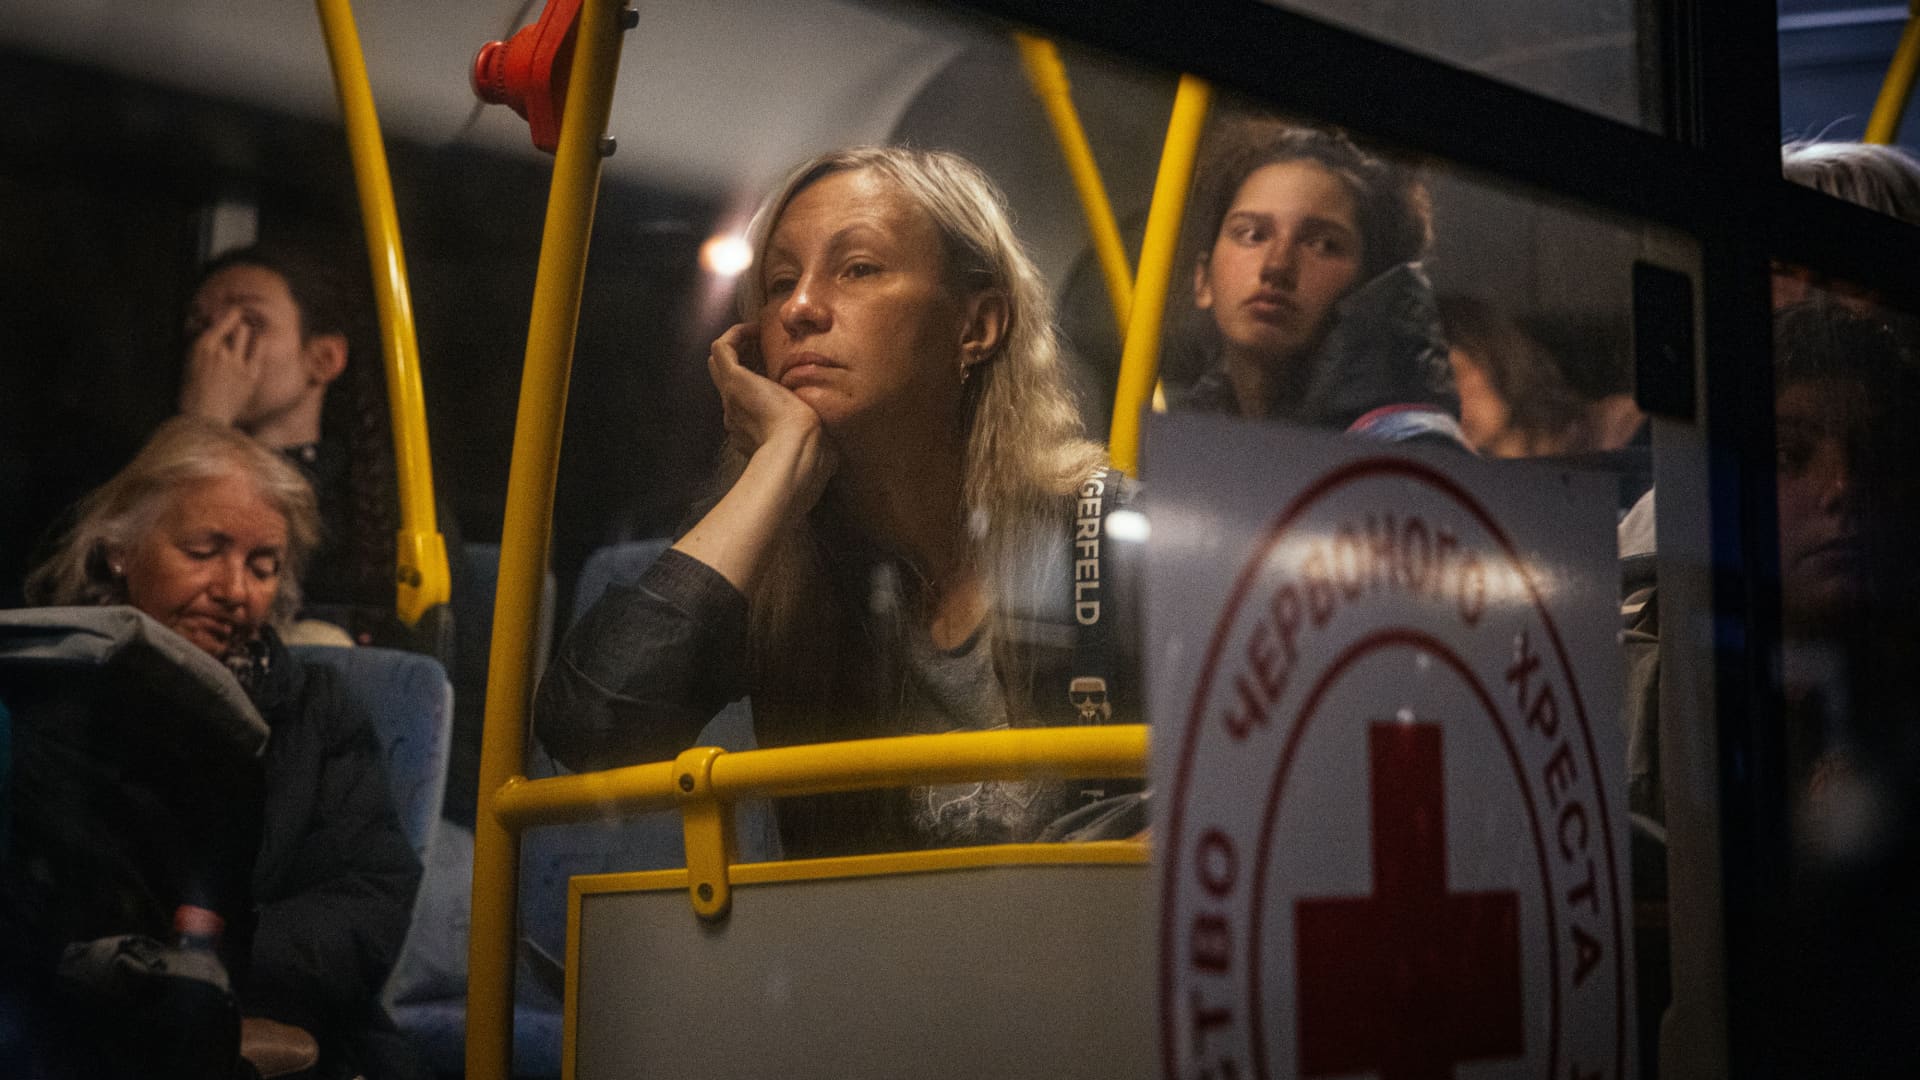 People evacuated from Mariupol arrive on buses at a registration and processing area for internally displaced people in Zaporizhzhia, on May 8, 2022.